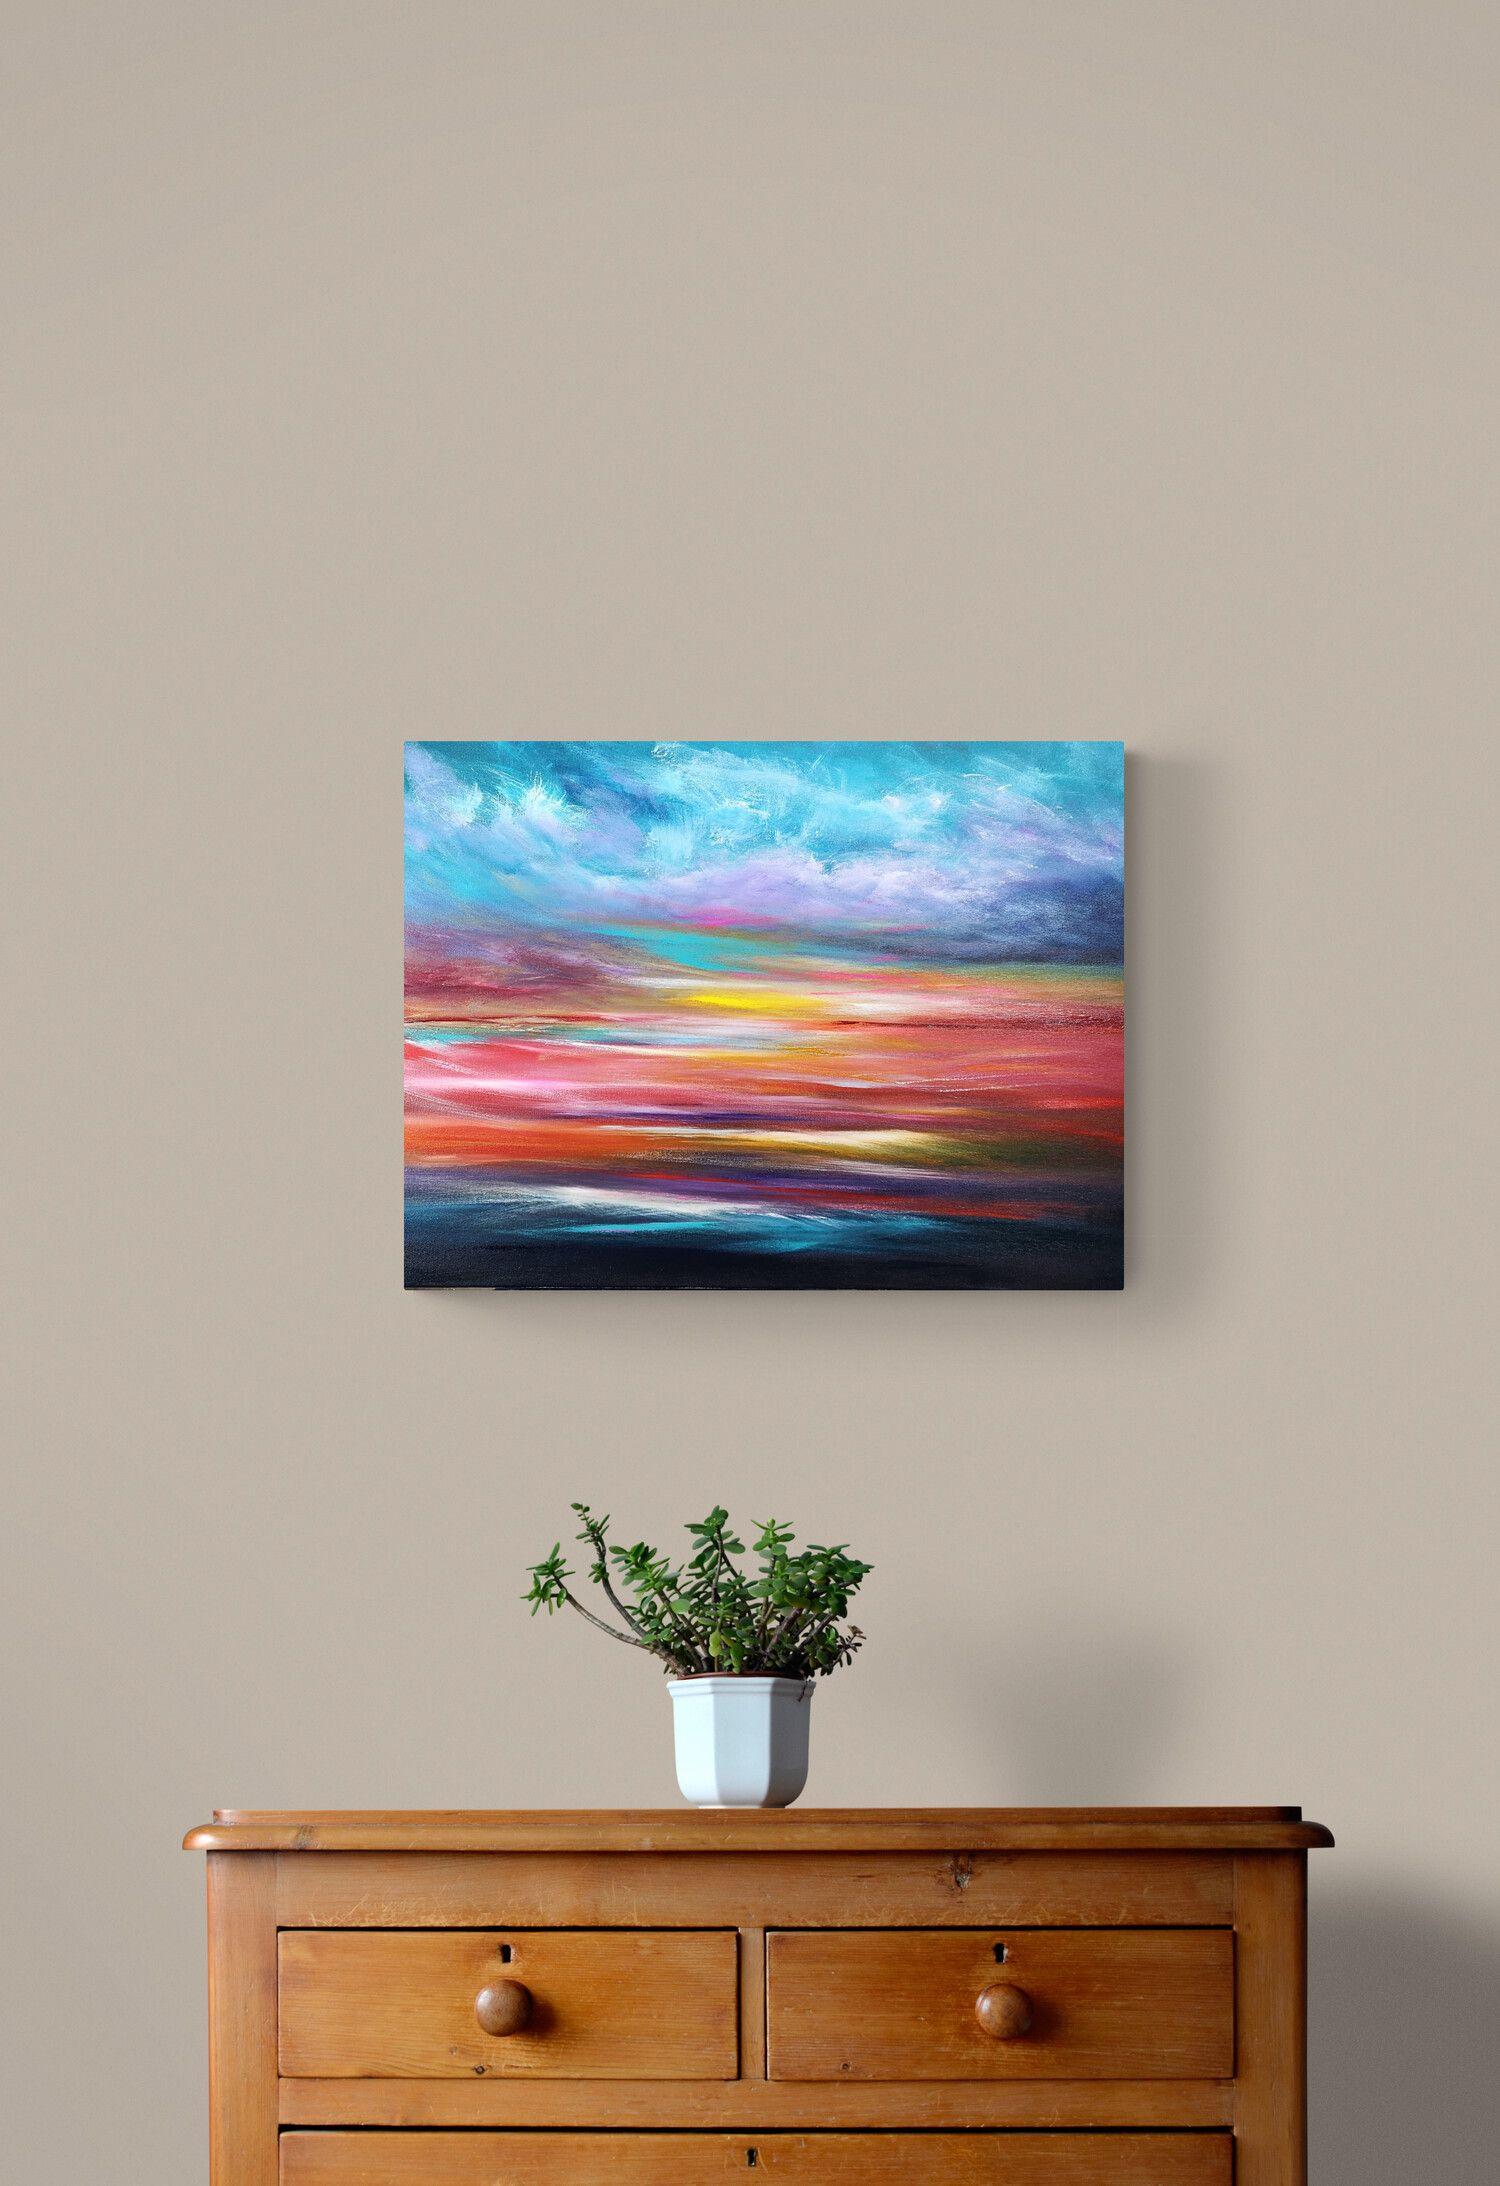 A rich and vivid painting with a sky of vibrant hues. Emotional and energetic, painted with passion and mood    This painting is on artist quality cotton canvas, and stretched with strong wooden bars. With painted sides and varnish it is ready to go